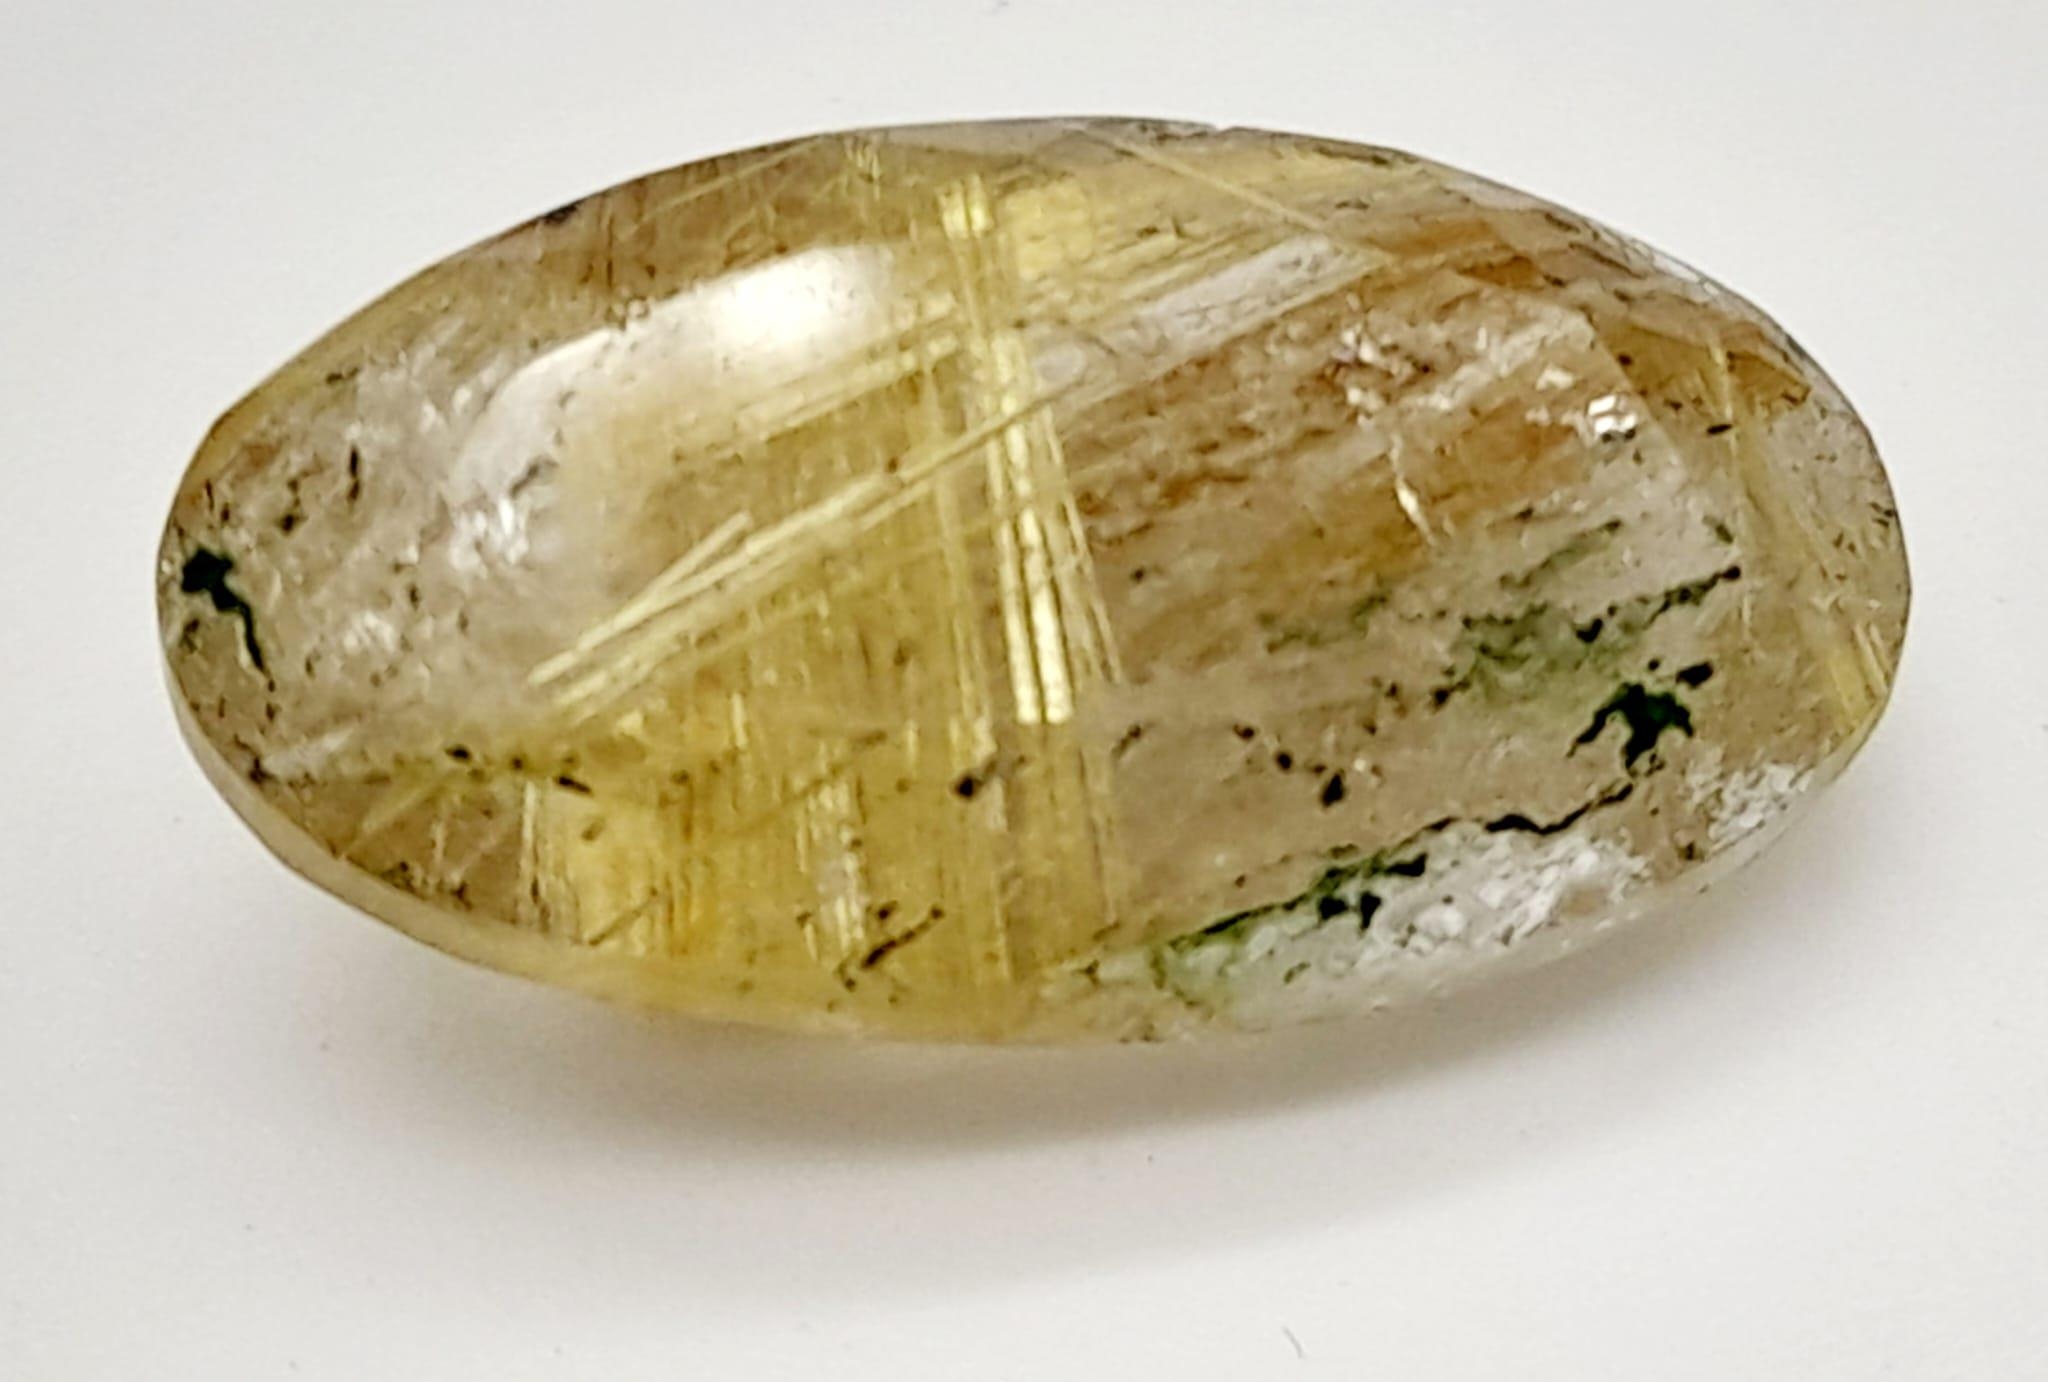 A 13.10ct Natural Rutile Quartz, in an Oval Shape cut. Come with the GLI Certificate - Image 5 of 8